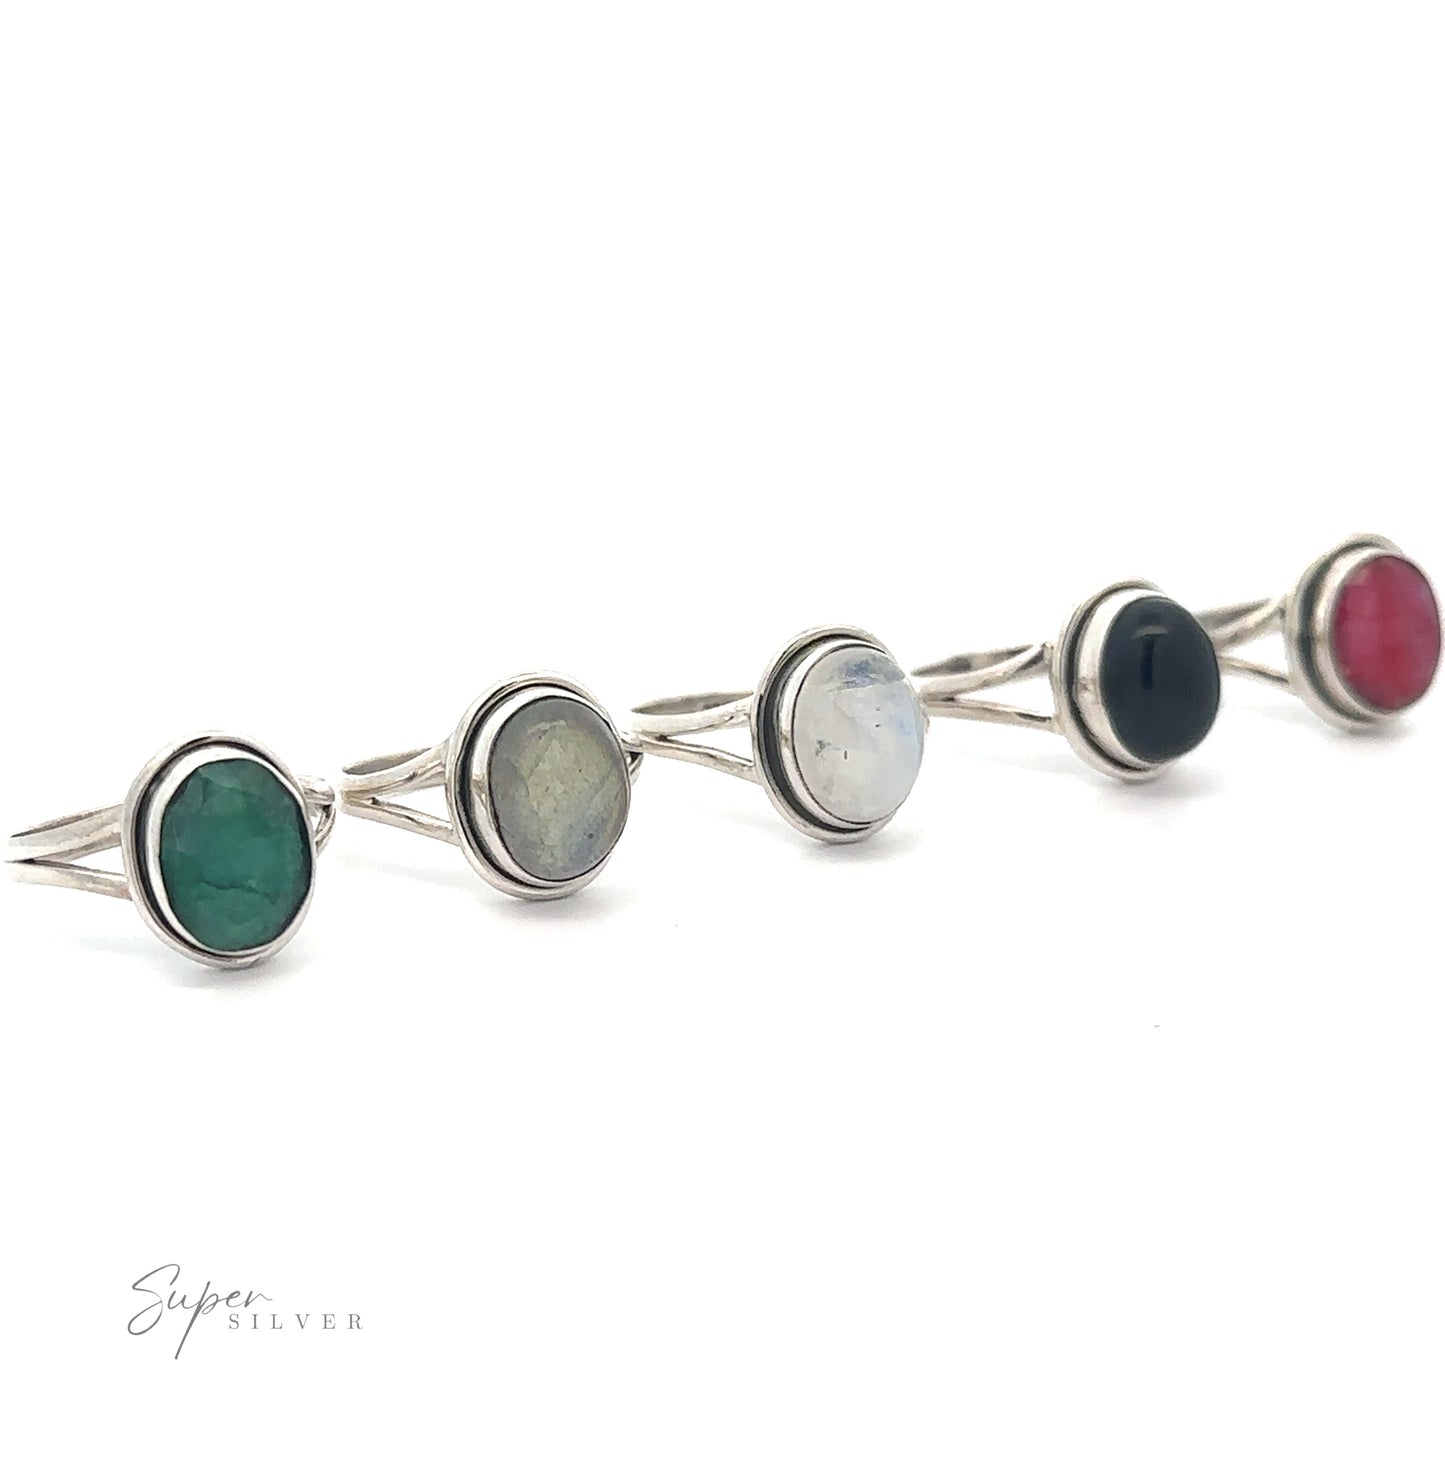 Four sterling silver Oval Split Shank Stone Rings with assorted gemstones, displayed in a row against a white background.